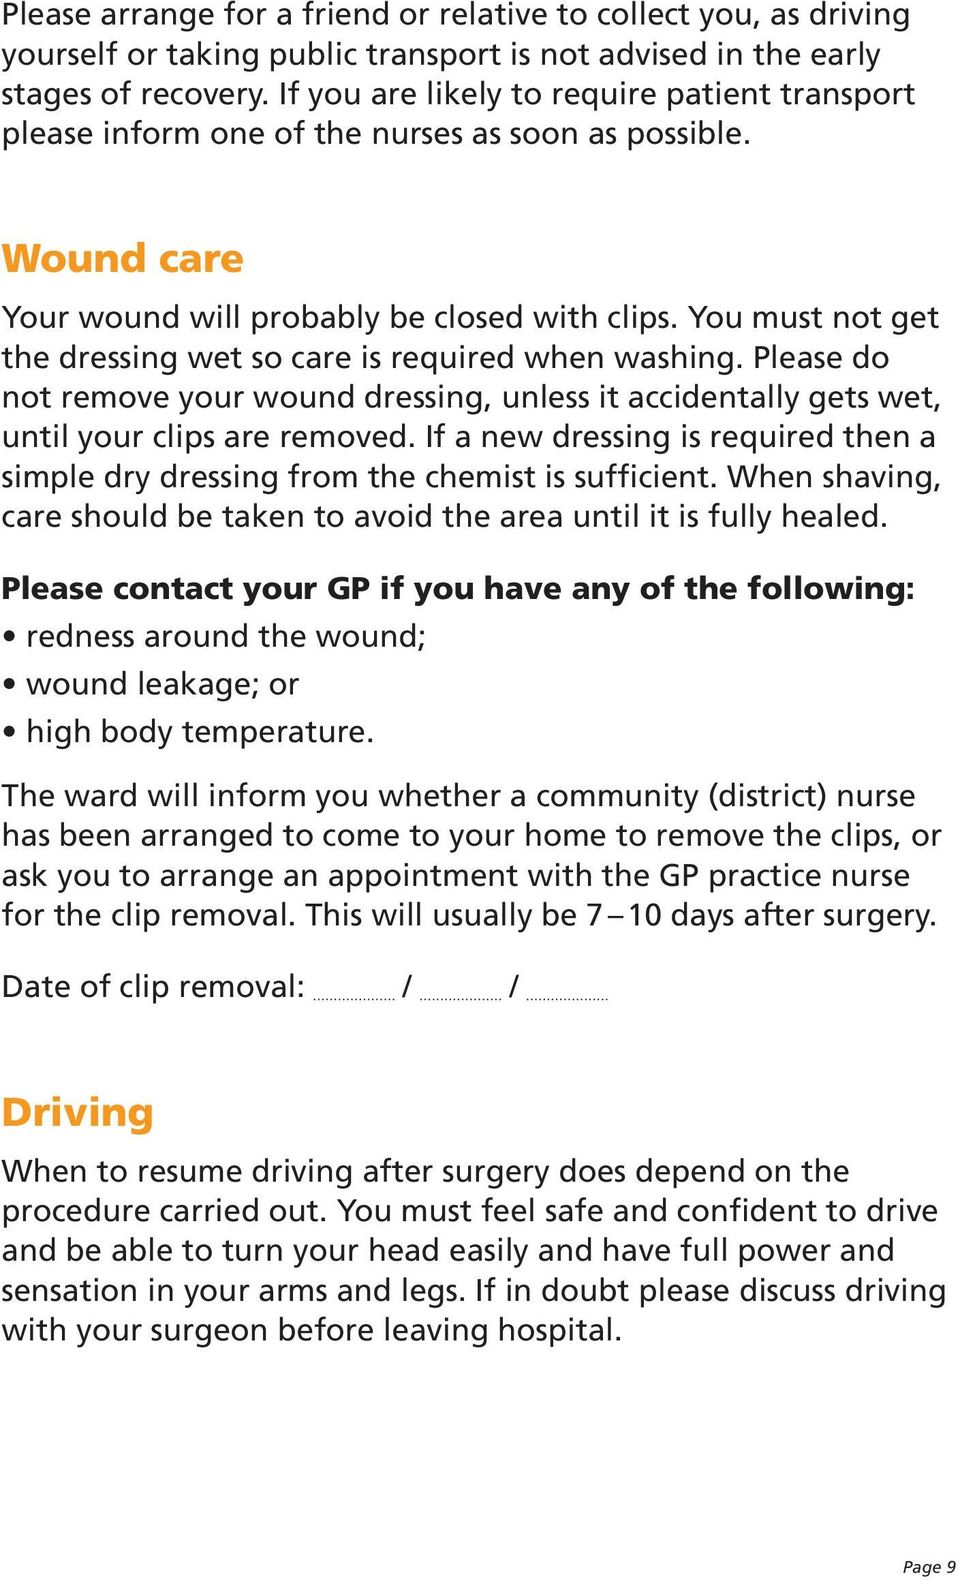 You must not get the dressing wet so care is required when washing. Please do not remove your wound dressing, unless it accidentally gets wet, until your clips are removed.